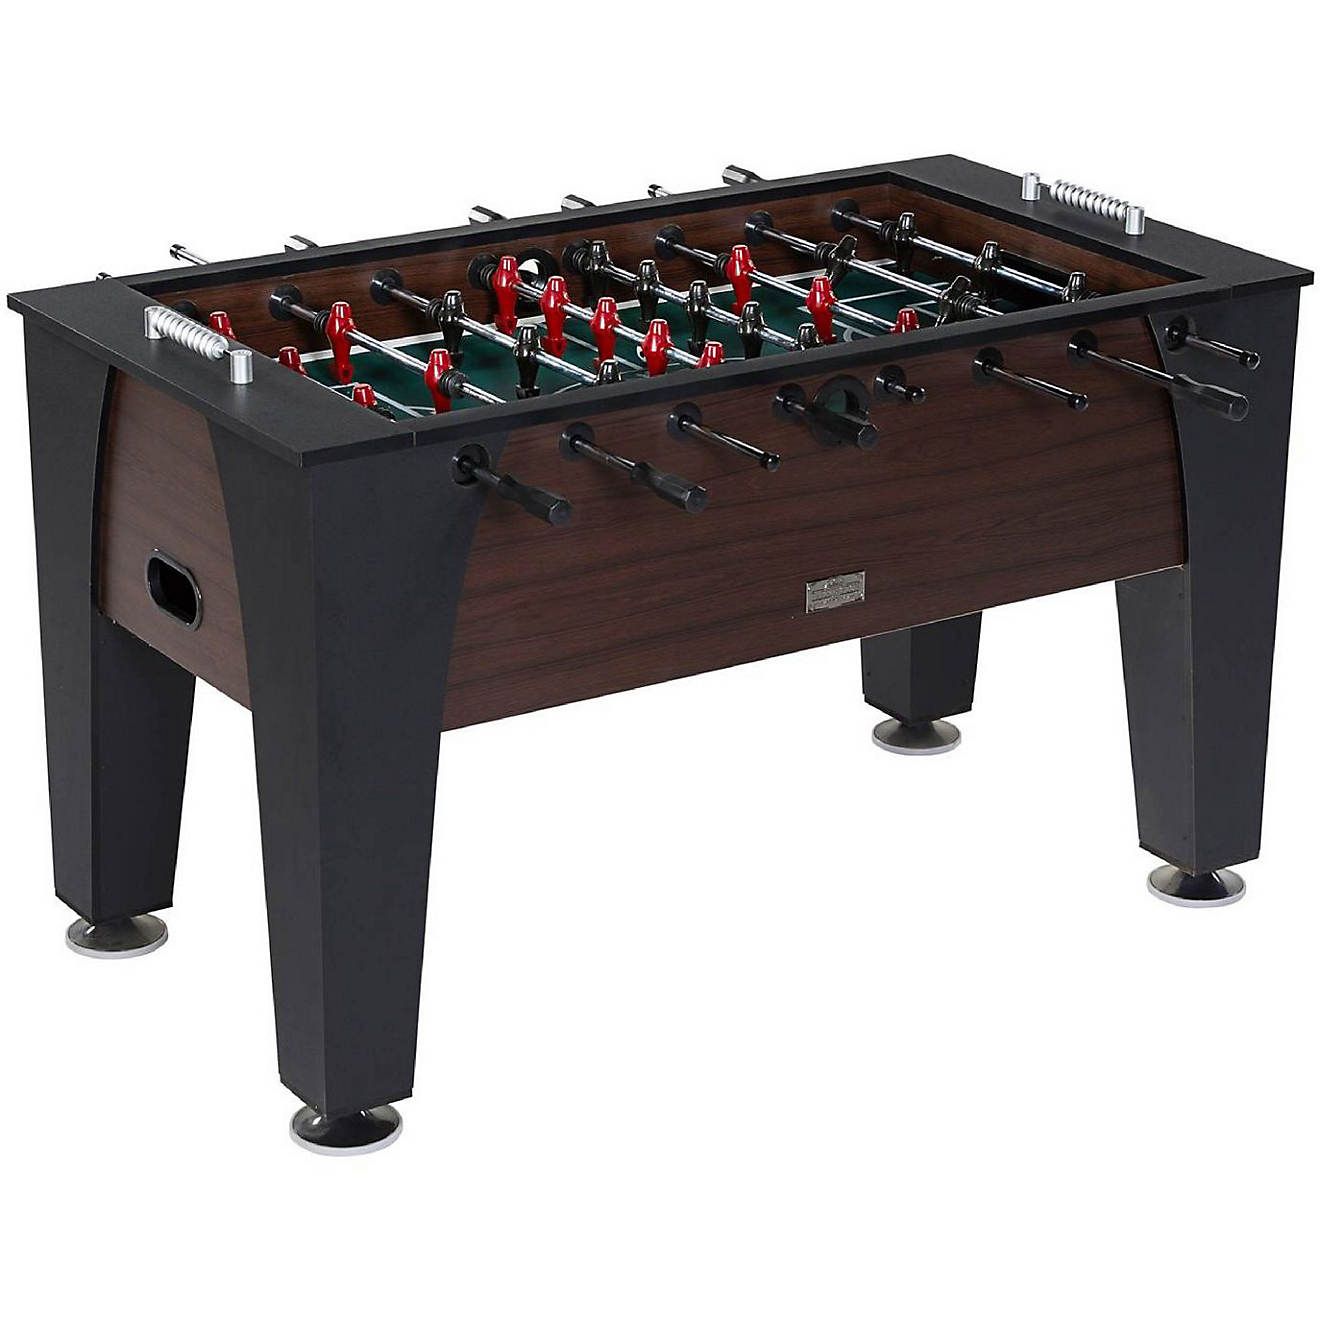 MD Sports Barrington 58 in x 30 in Foosball Table | Academy Sports + Outdoor Affiliate